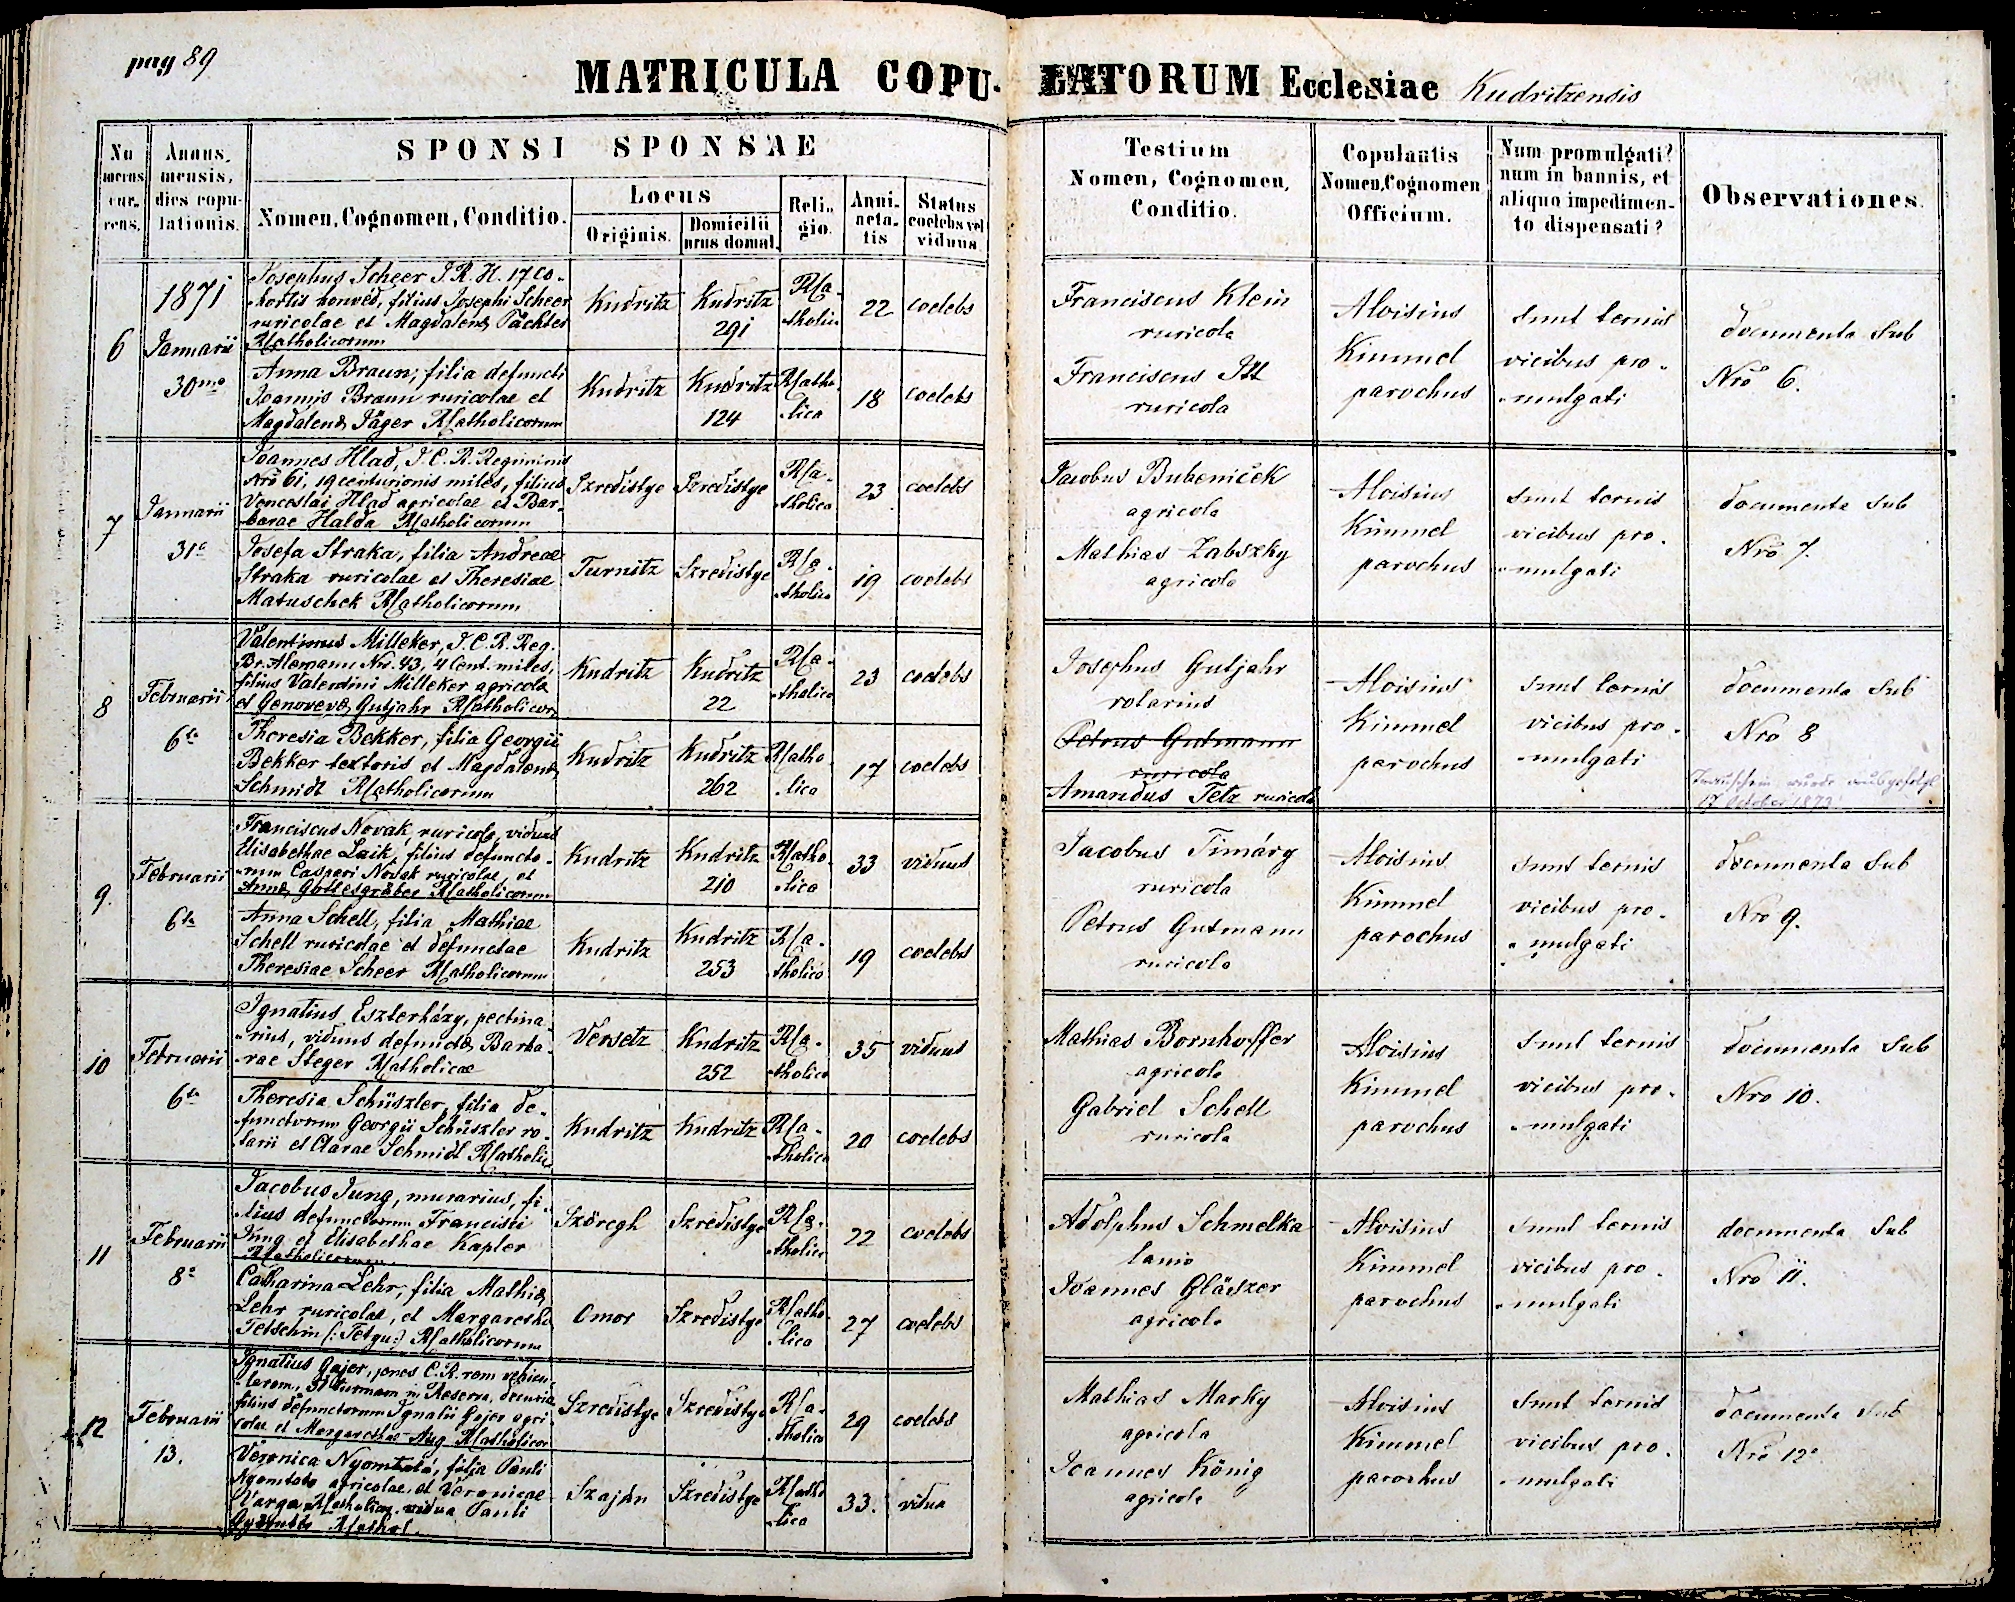 images/church_records/MARRIAGES/1871-1890M/089